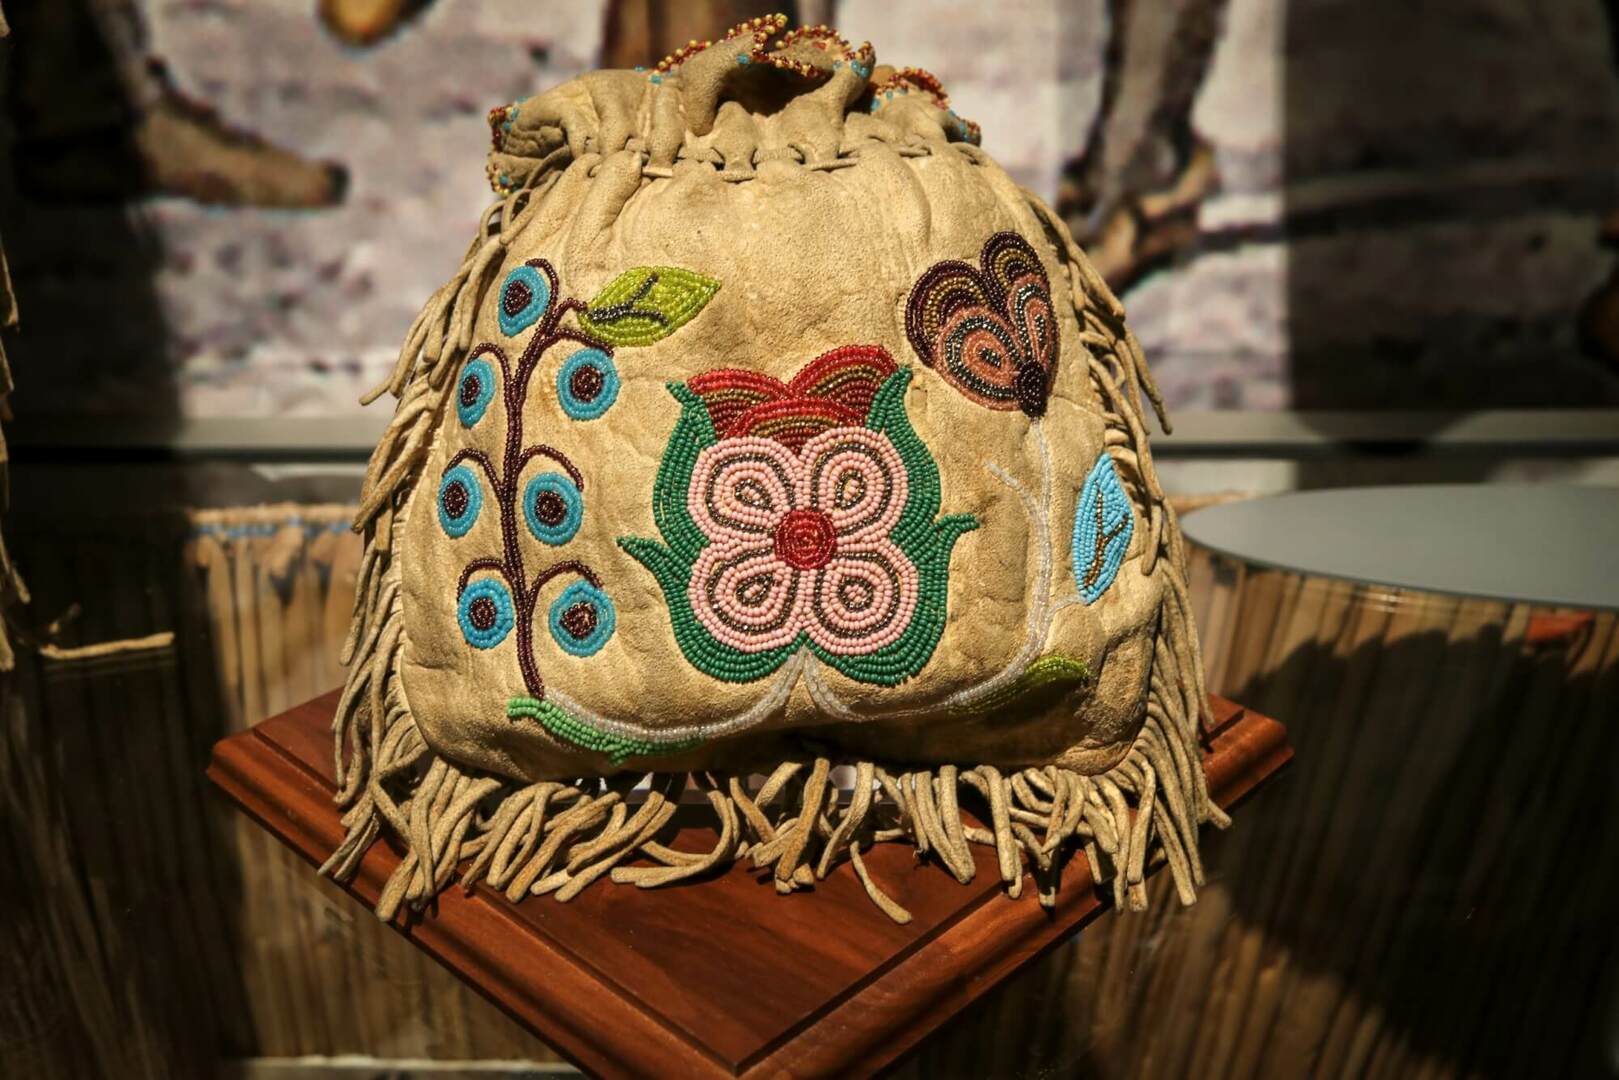 Decoratively beaded bag on display